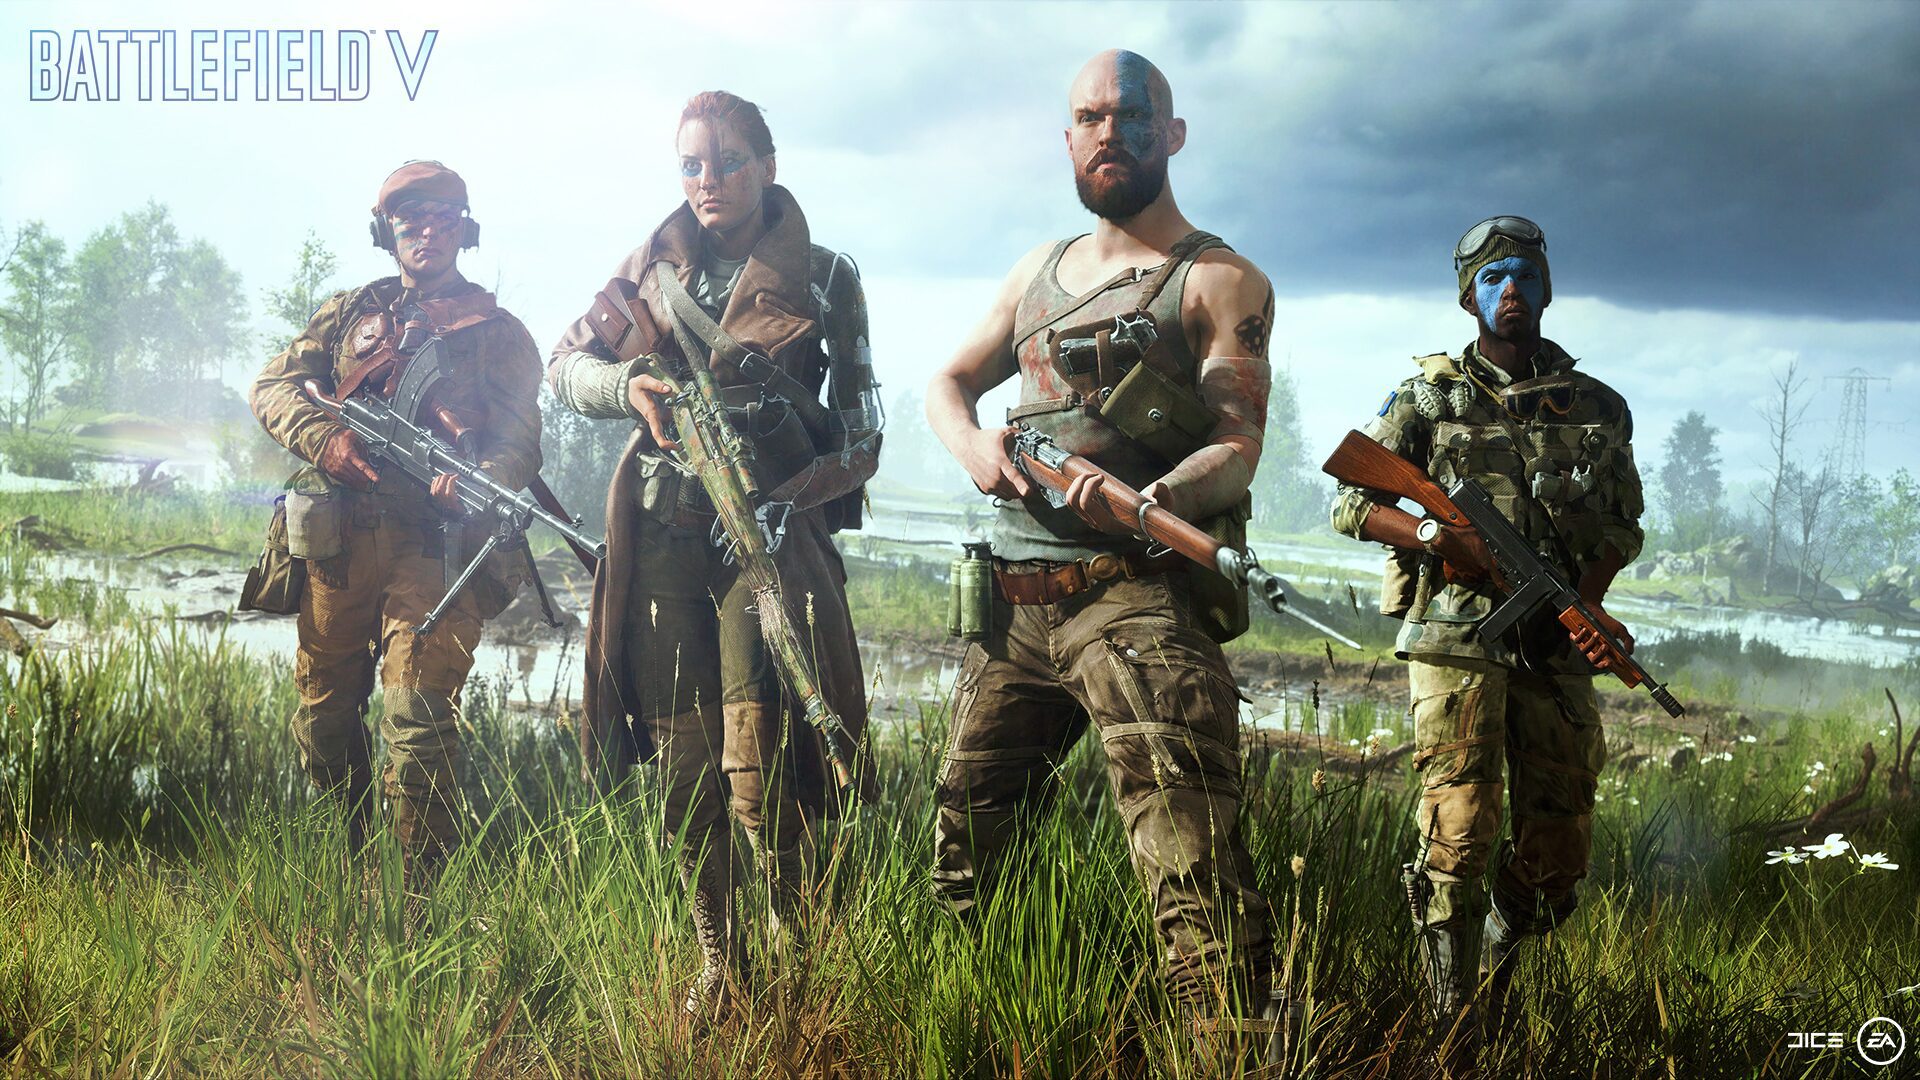 Analyst Predicts Battlefield V Will Be “Serious Disappointment” For EA